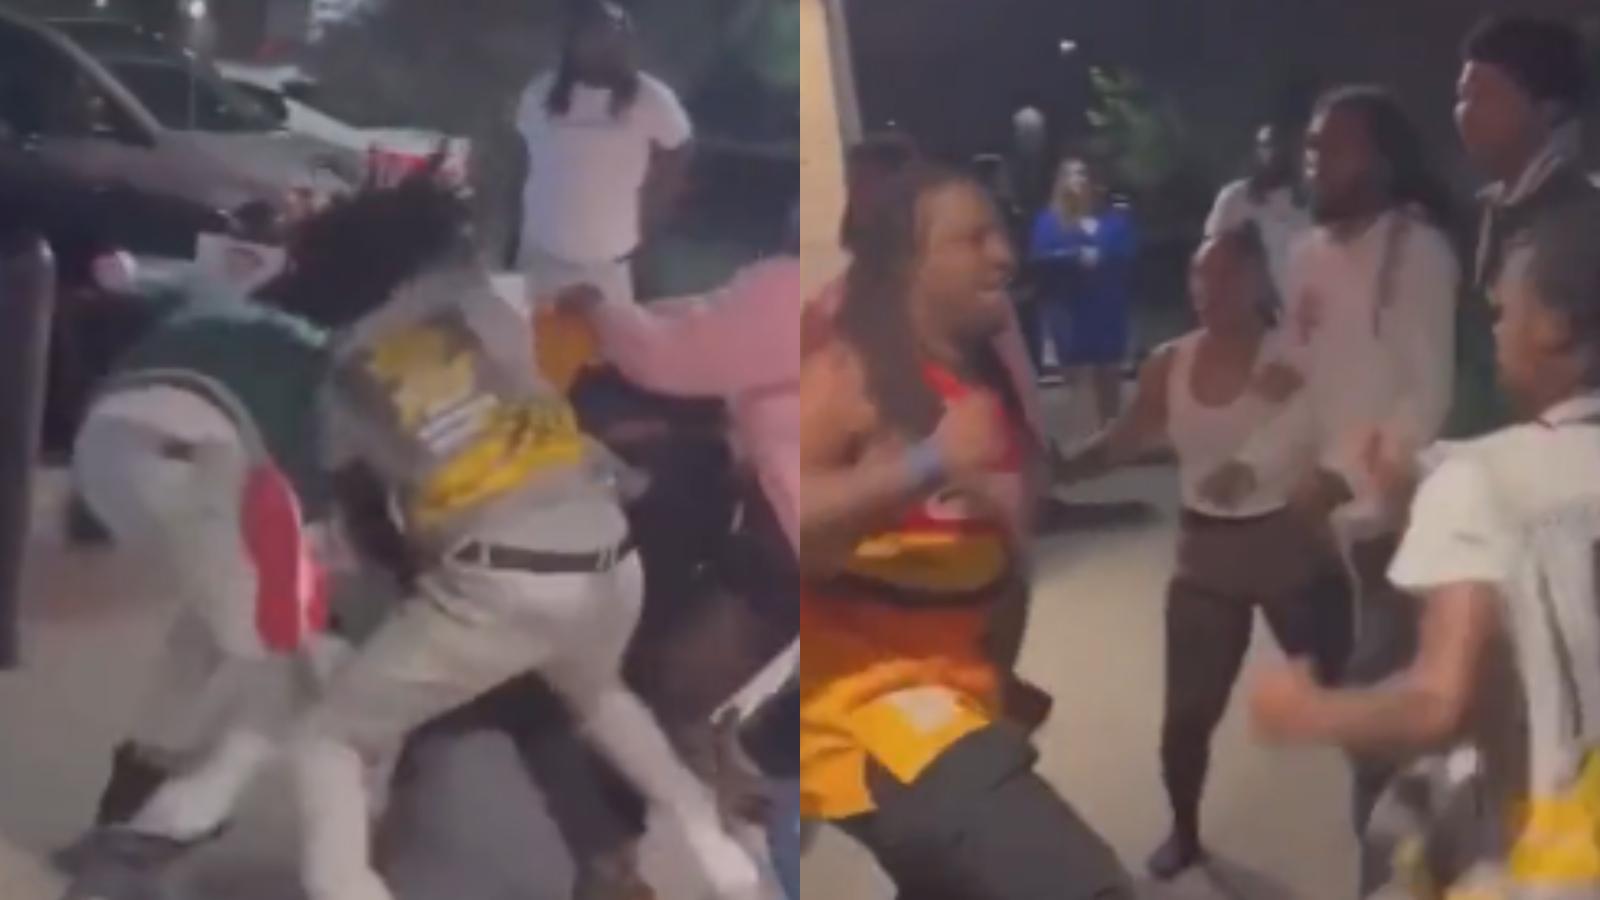 Man fights eight people at once in viral brawl